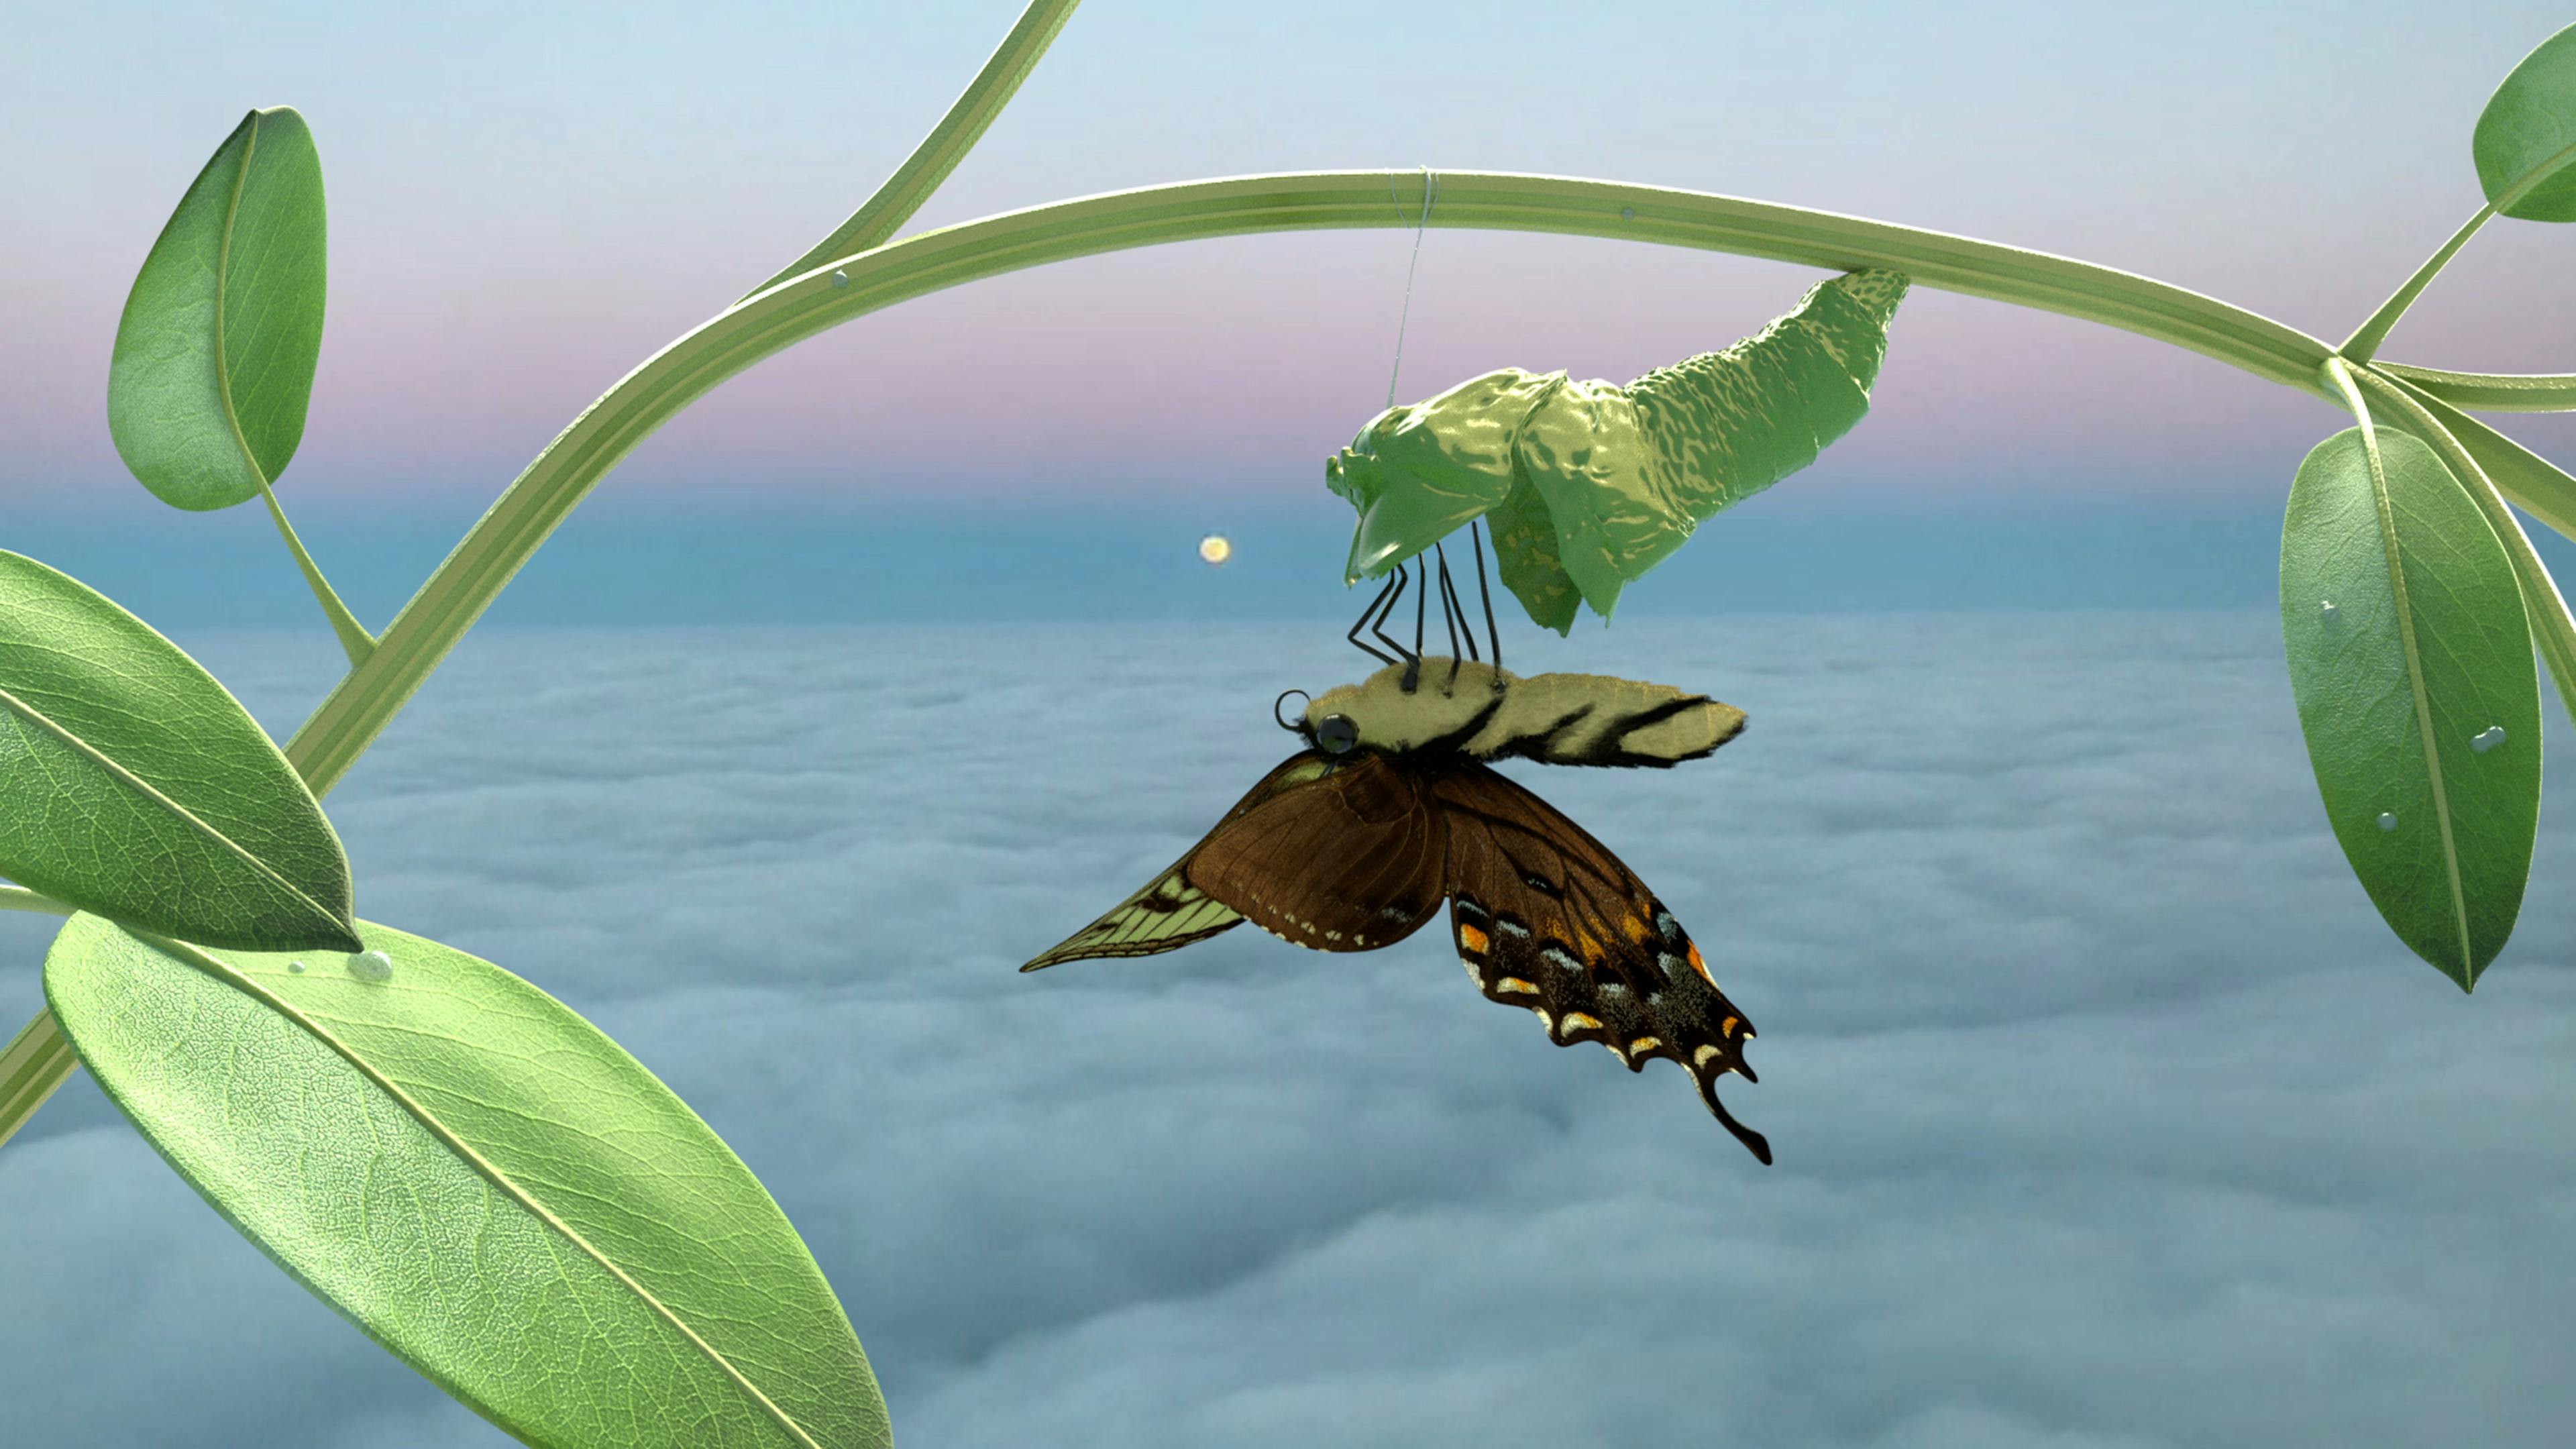 A digital rendering of a butterfly, upside down and emerging from its cocoon on a green vine, in front of an expanse of cloud-covered sky at dusk.